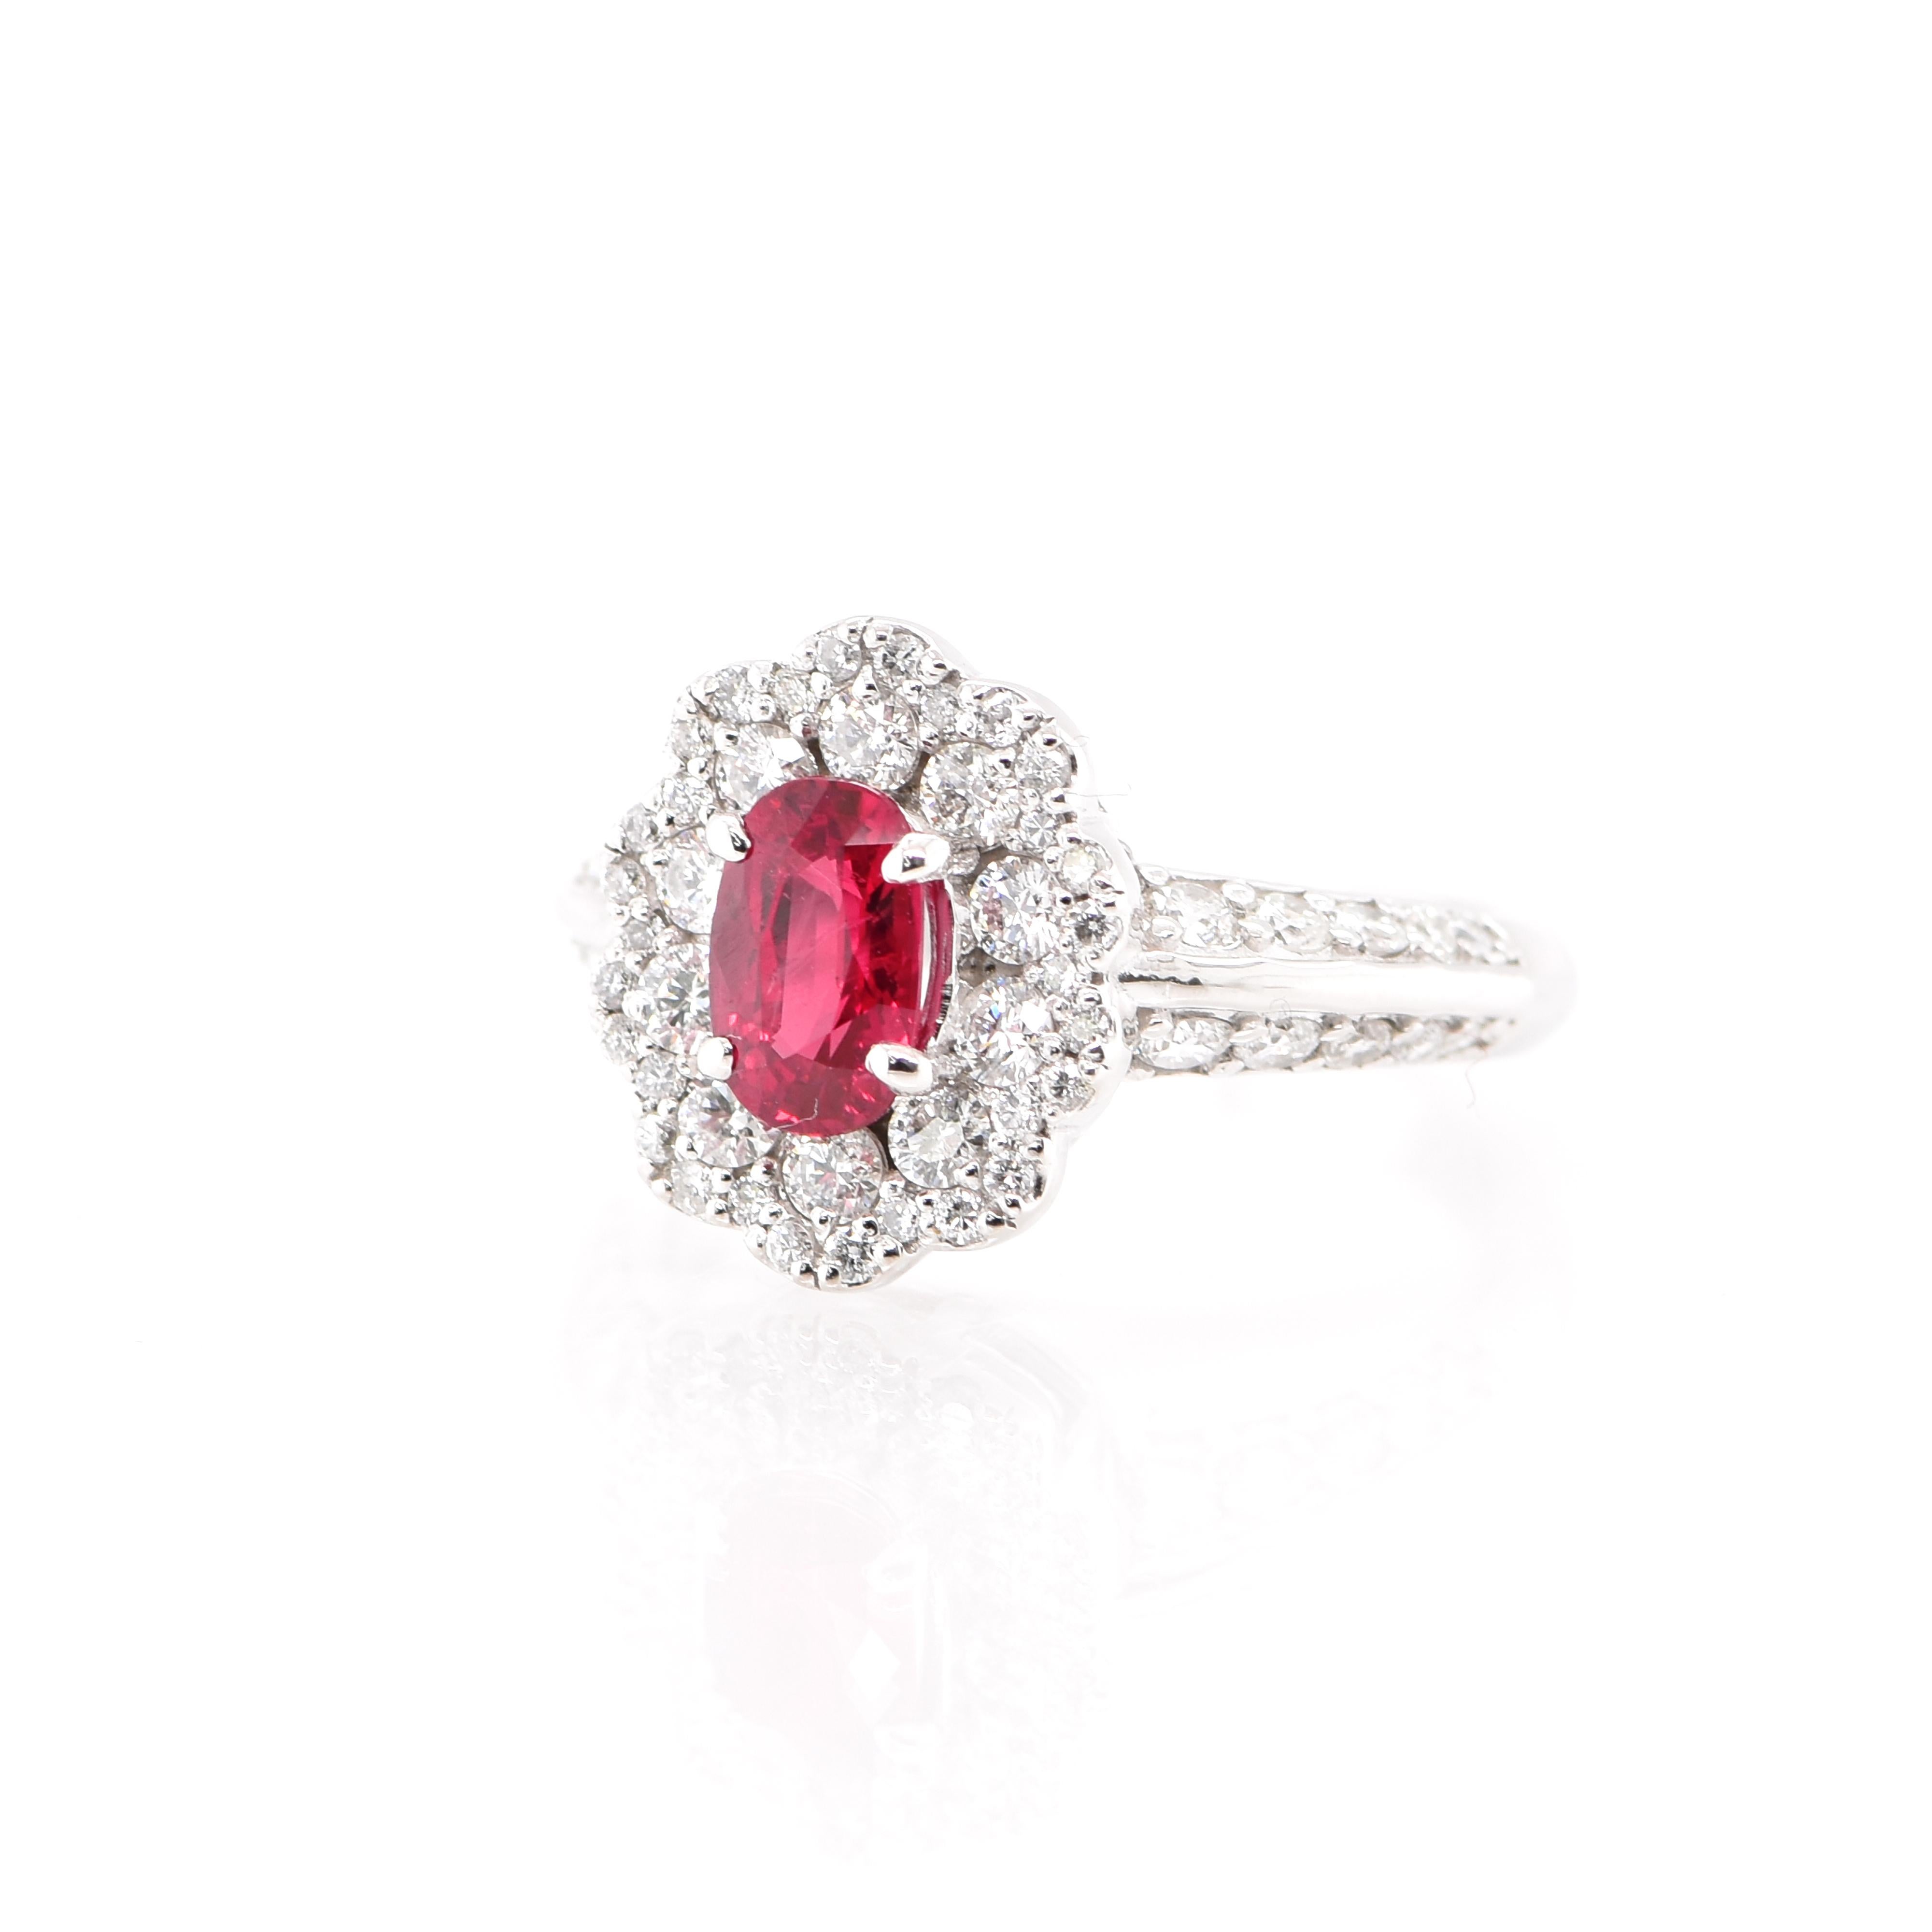 A beautiful Halo Ring featuring a 1.00 Carat Natural Ruby and 0.94 Carats of Diamond Accents set in Platinum. Rubies are referred to as 